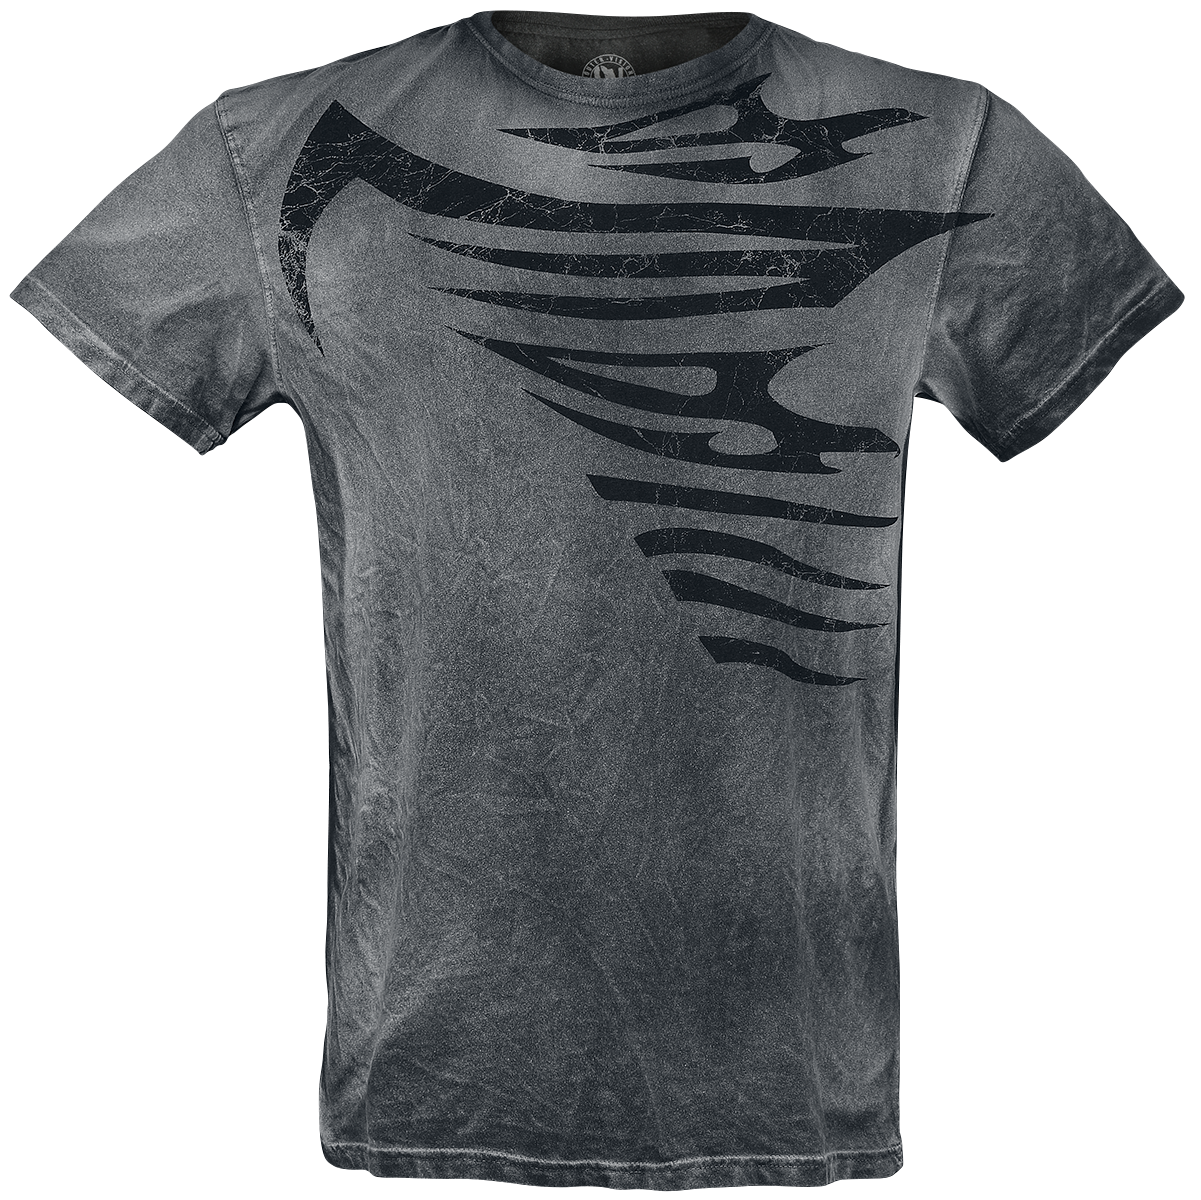 Outer Vision - Tiger Paws - T-Shirt - black image